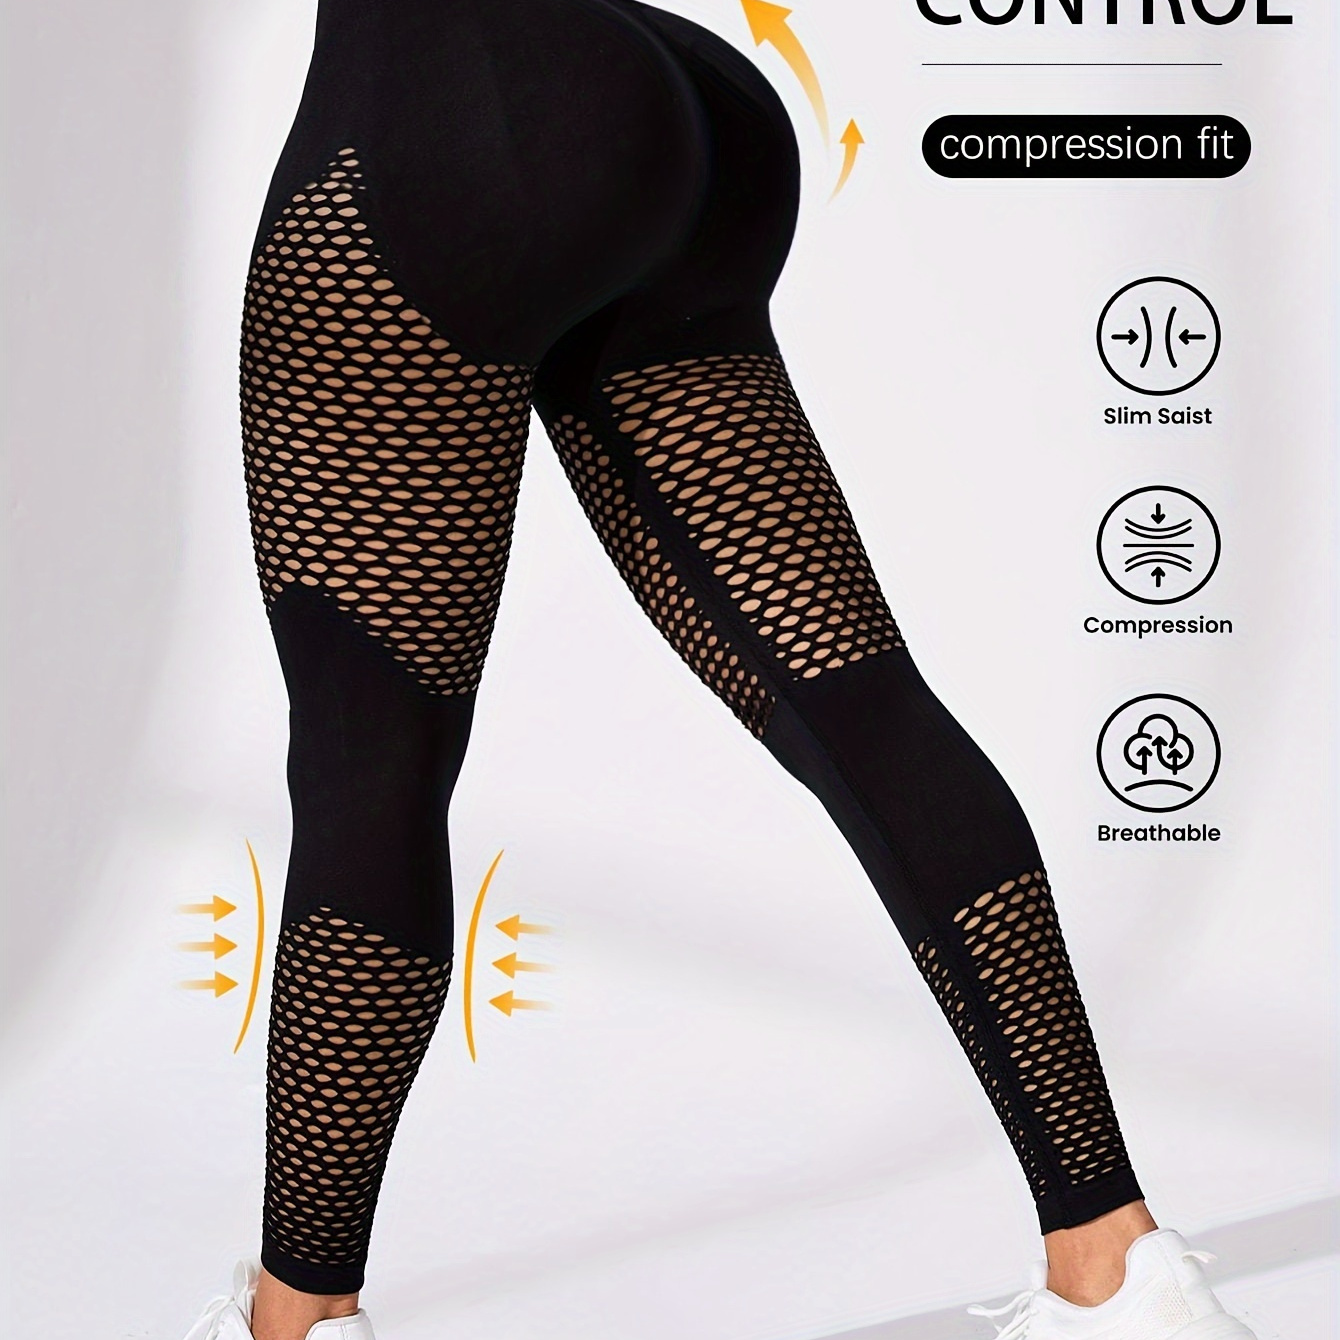 

Women's Mesh Panel, High-waist Compression Yoga Pants – Tummy Control, Breathable, Knitted Fabric, Hollow Design, Solid Color